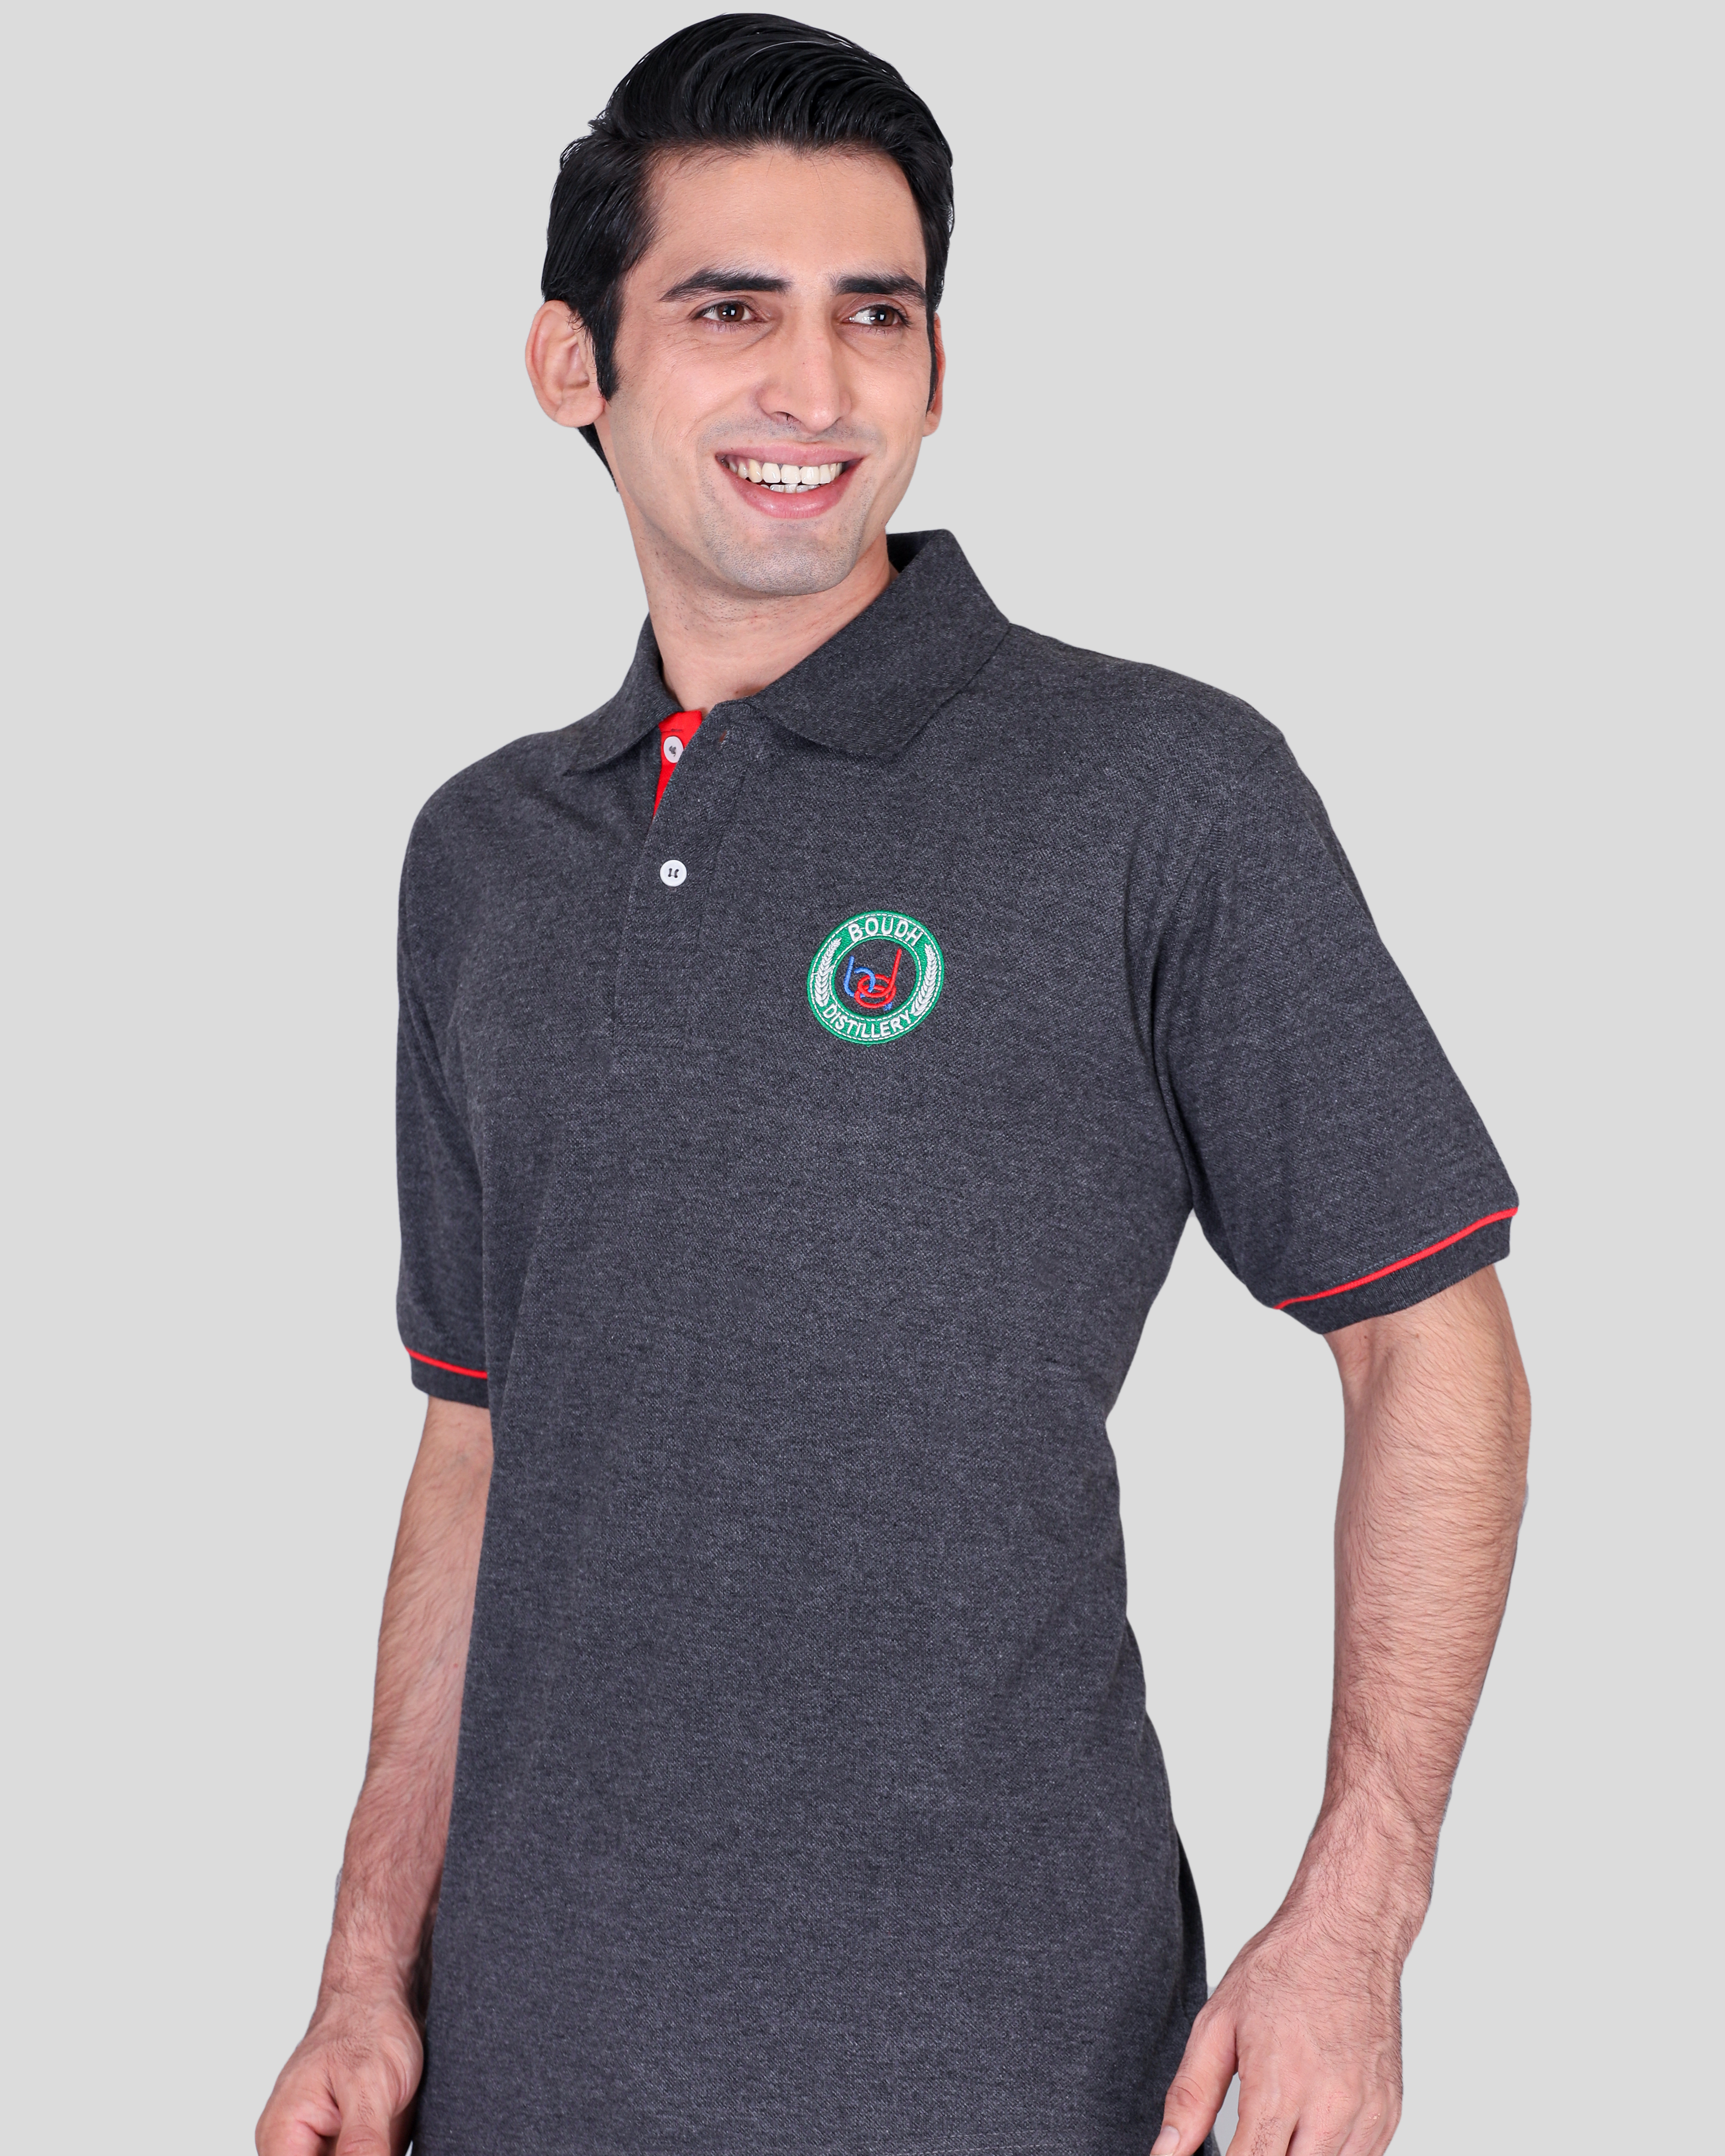 Boudh antra milanch promotional polo t-shirts supplier 